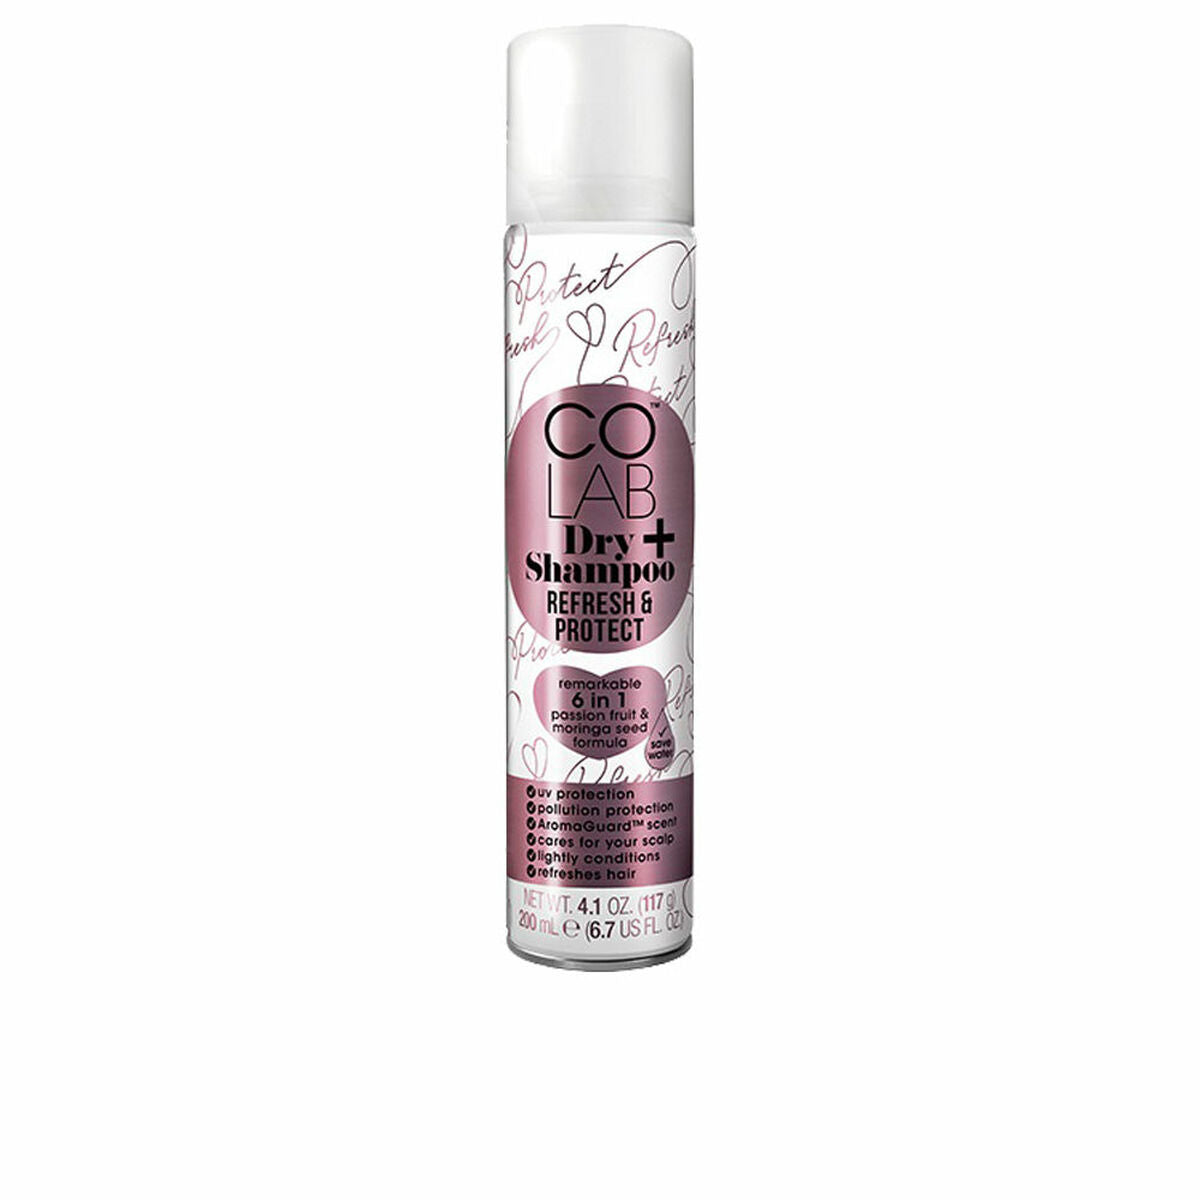 Dry Shampoo Colab Dry+ 6 in 1 Refreshing Protector 200 ml-0